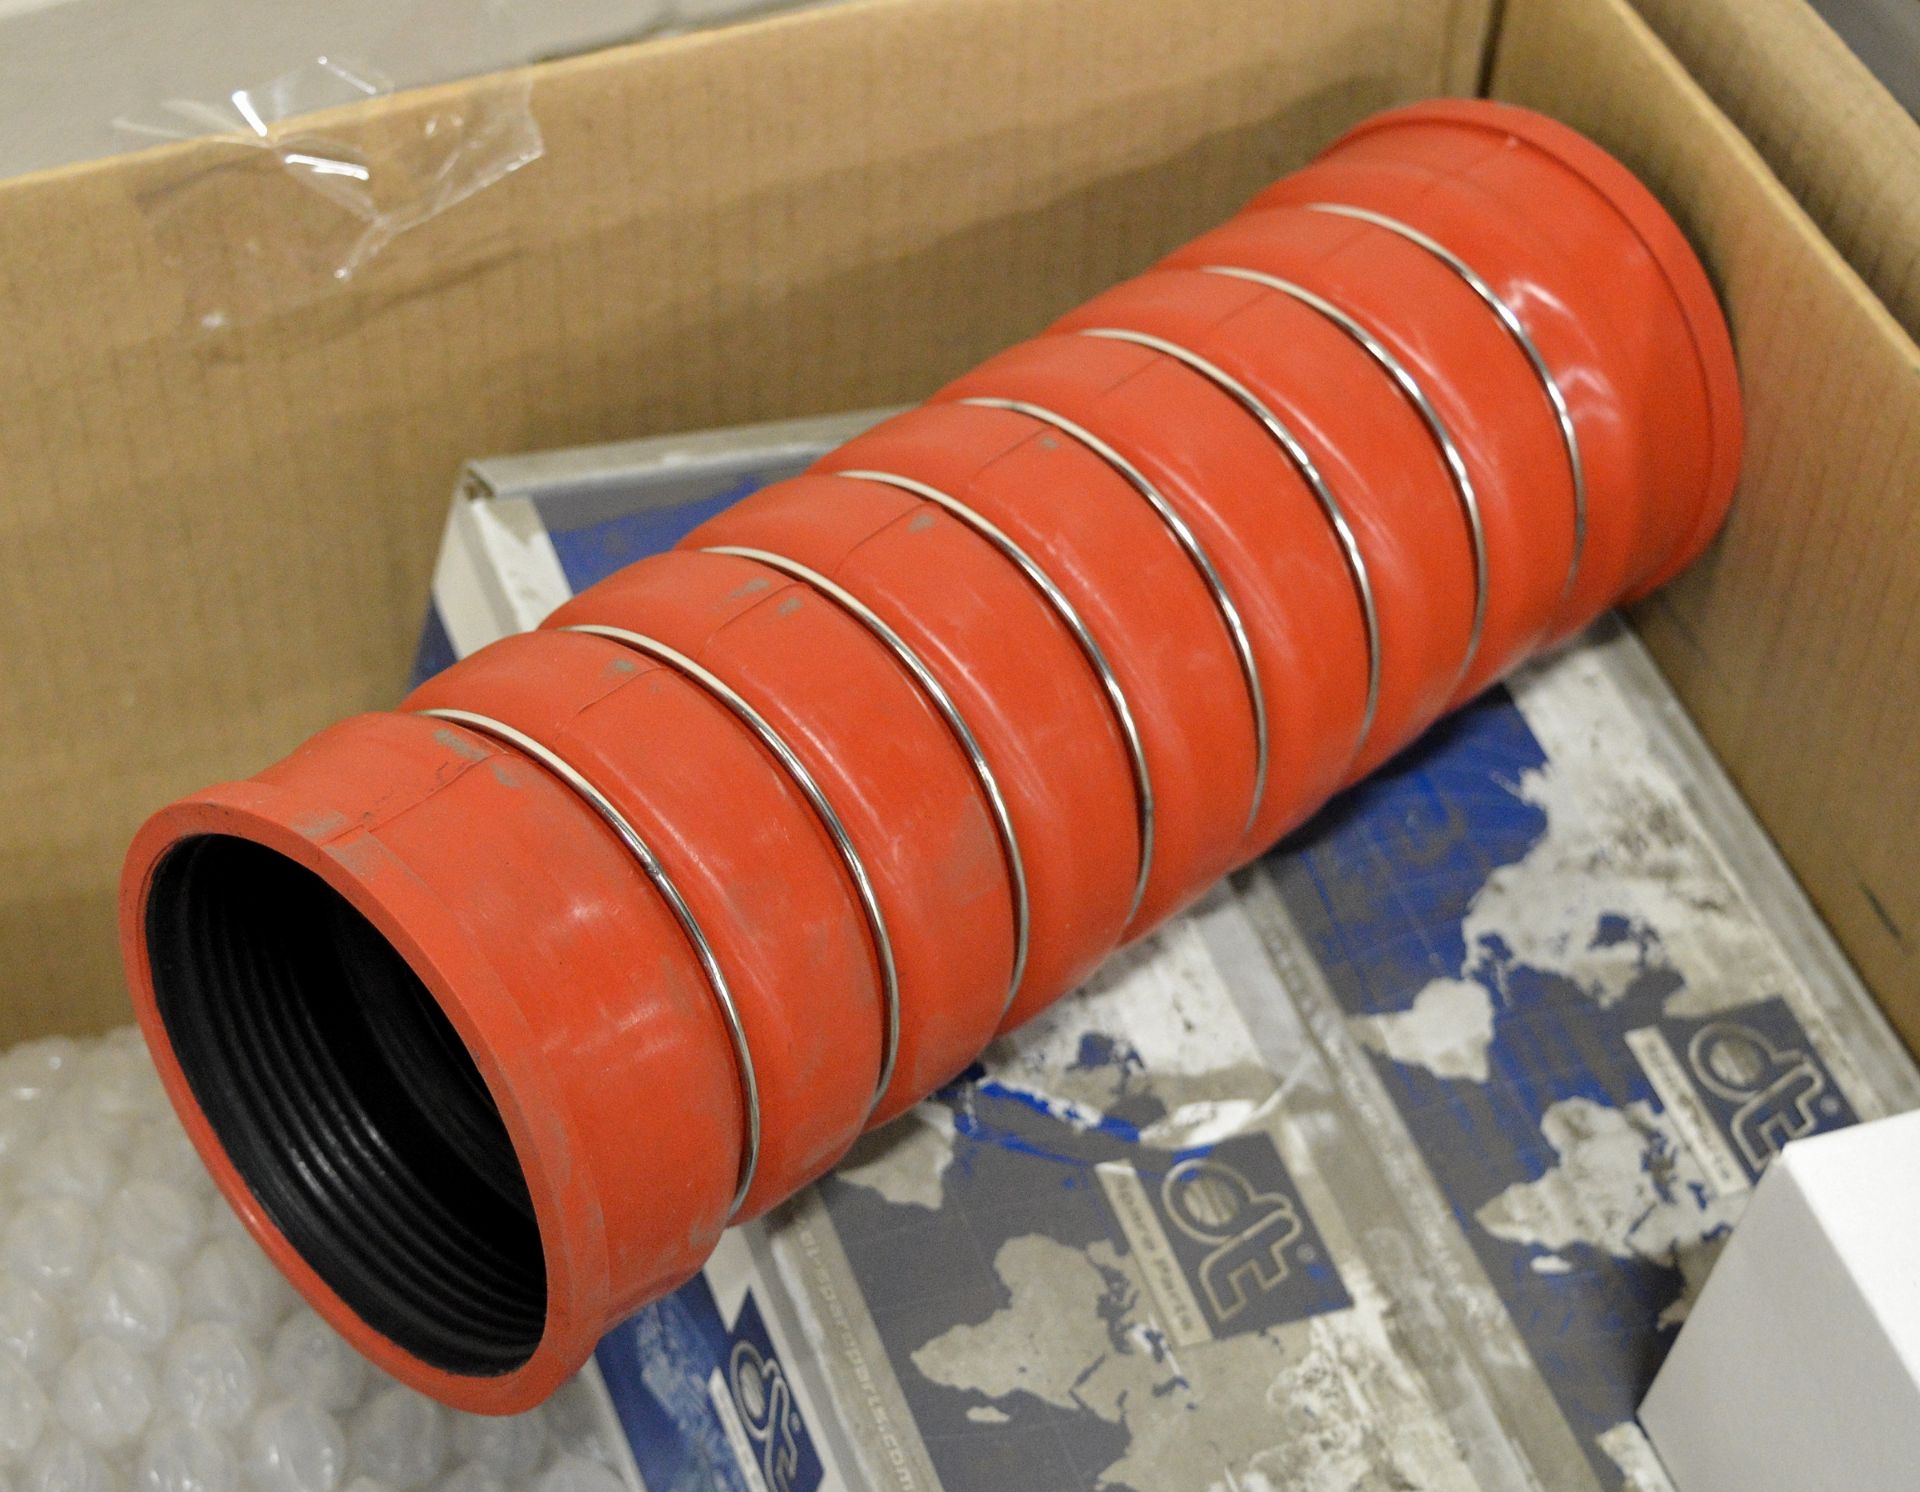 Vehicle parts - exhaust pipe, kingpin kit, side skirts, charge air hoses - see pictures - Image 6 of 7